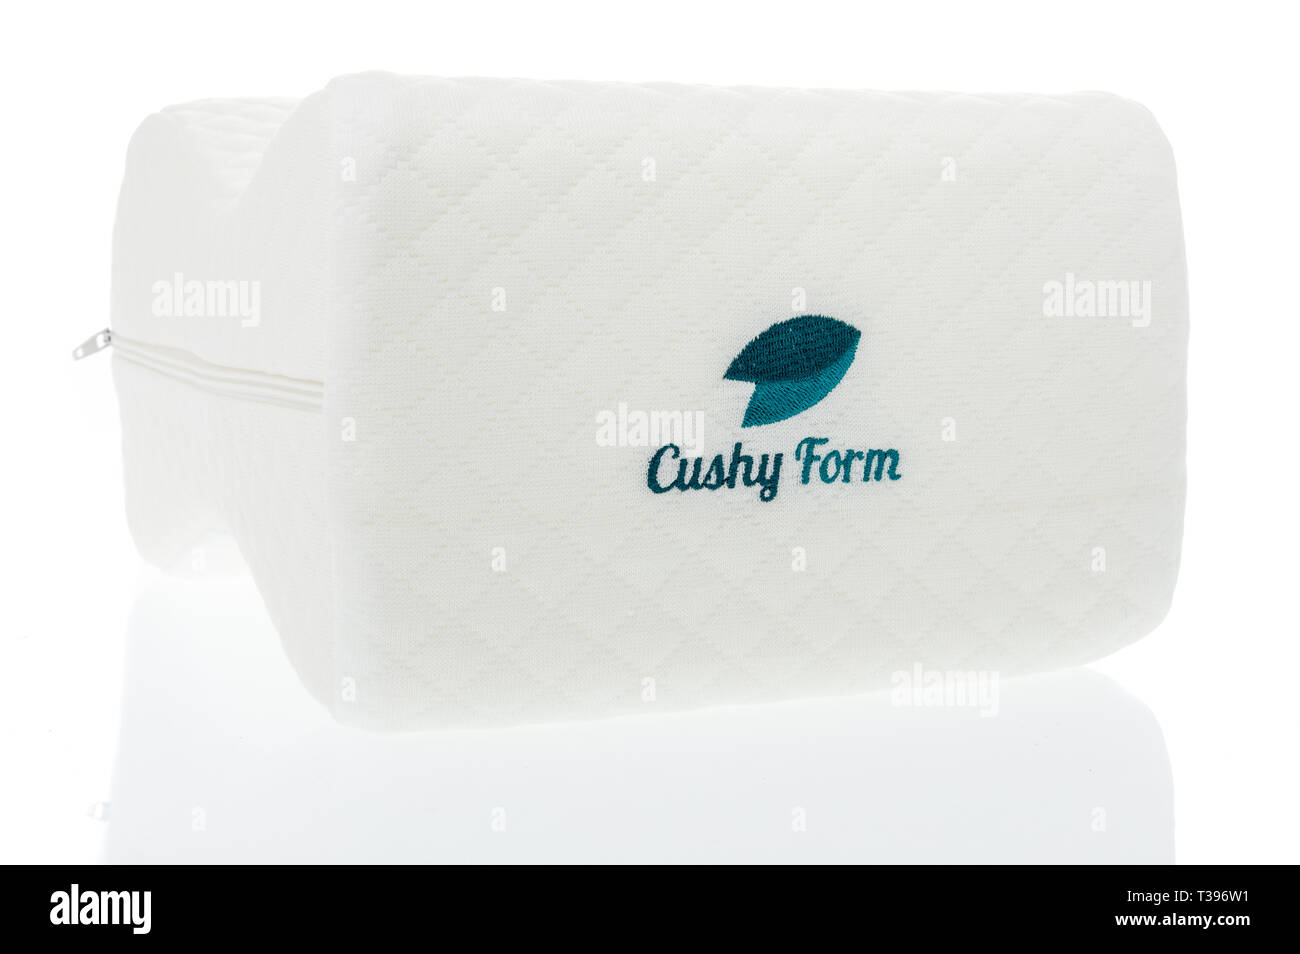 https://c8.alamy.com/comp/T396W1/winneconne-wi-7-april-2019-a-package-of-cushy-from-memory-foam-knee-pillow-on-an-isolated-background-T396W1.jpg